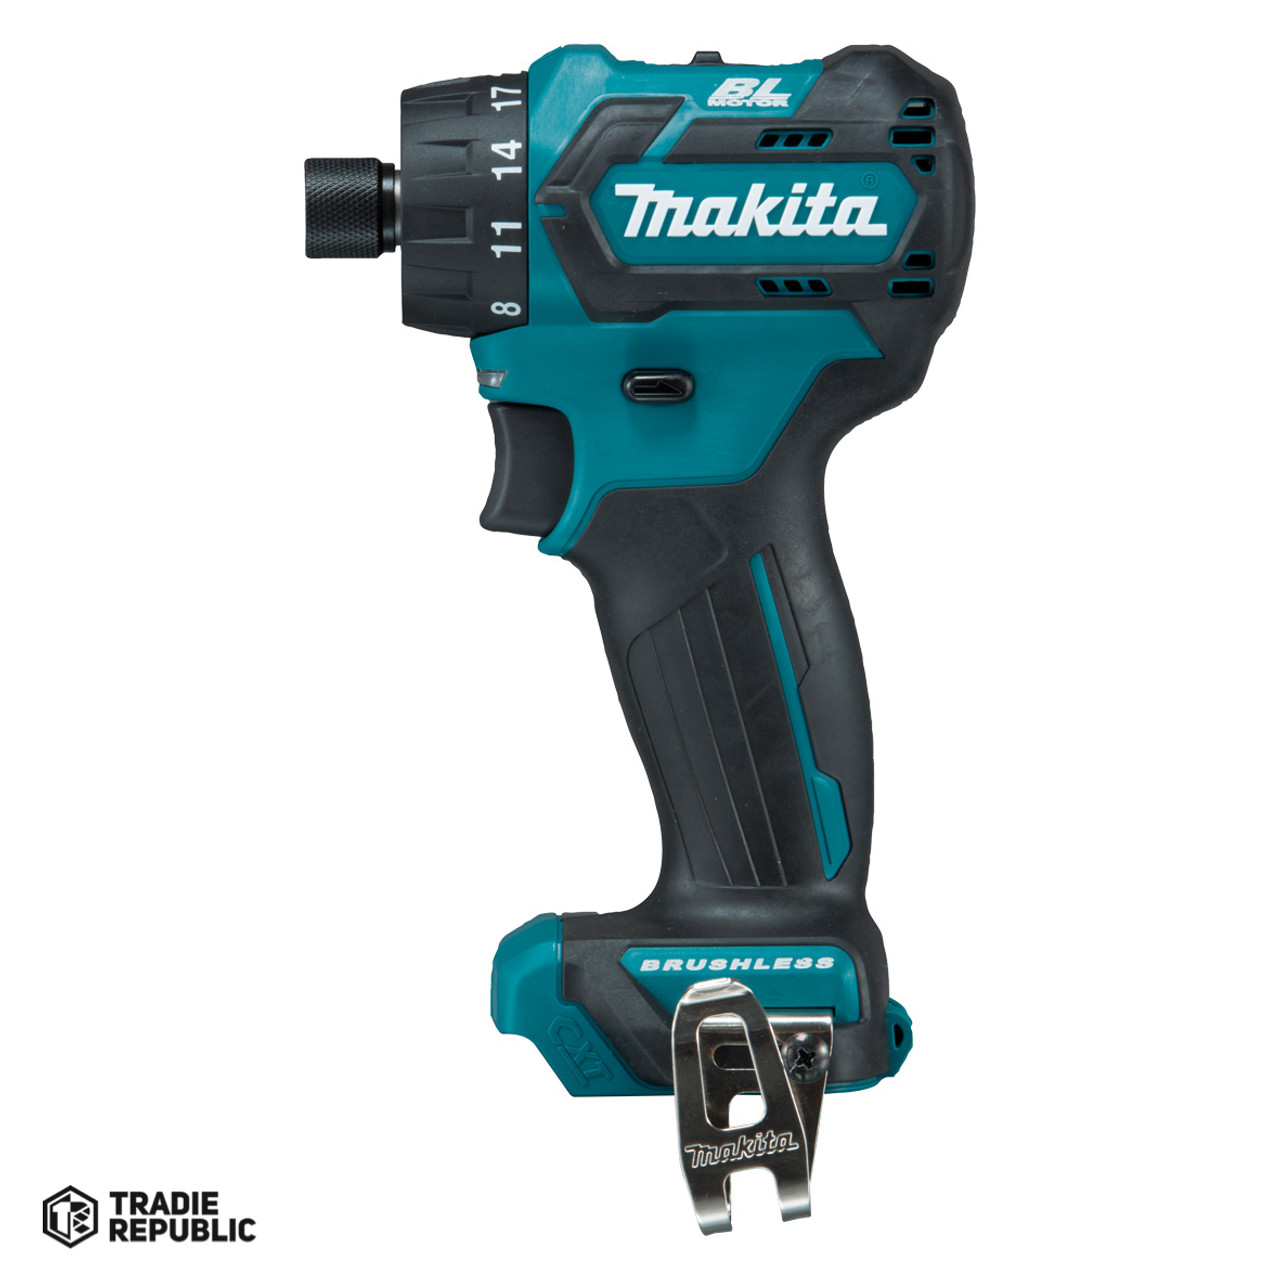 DF032DZ Makita 12V max CXT Brushless 1/4 Hex Driver-Drill, Tool Only